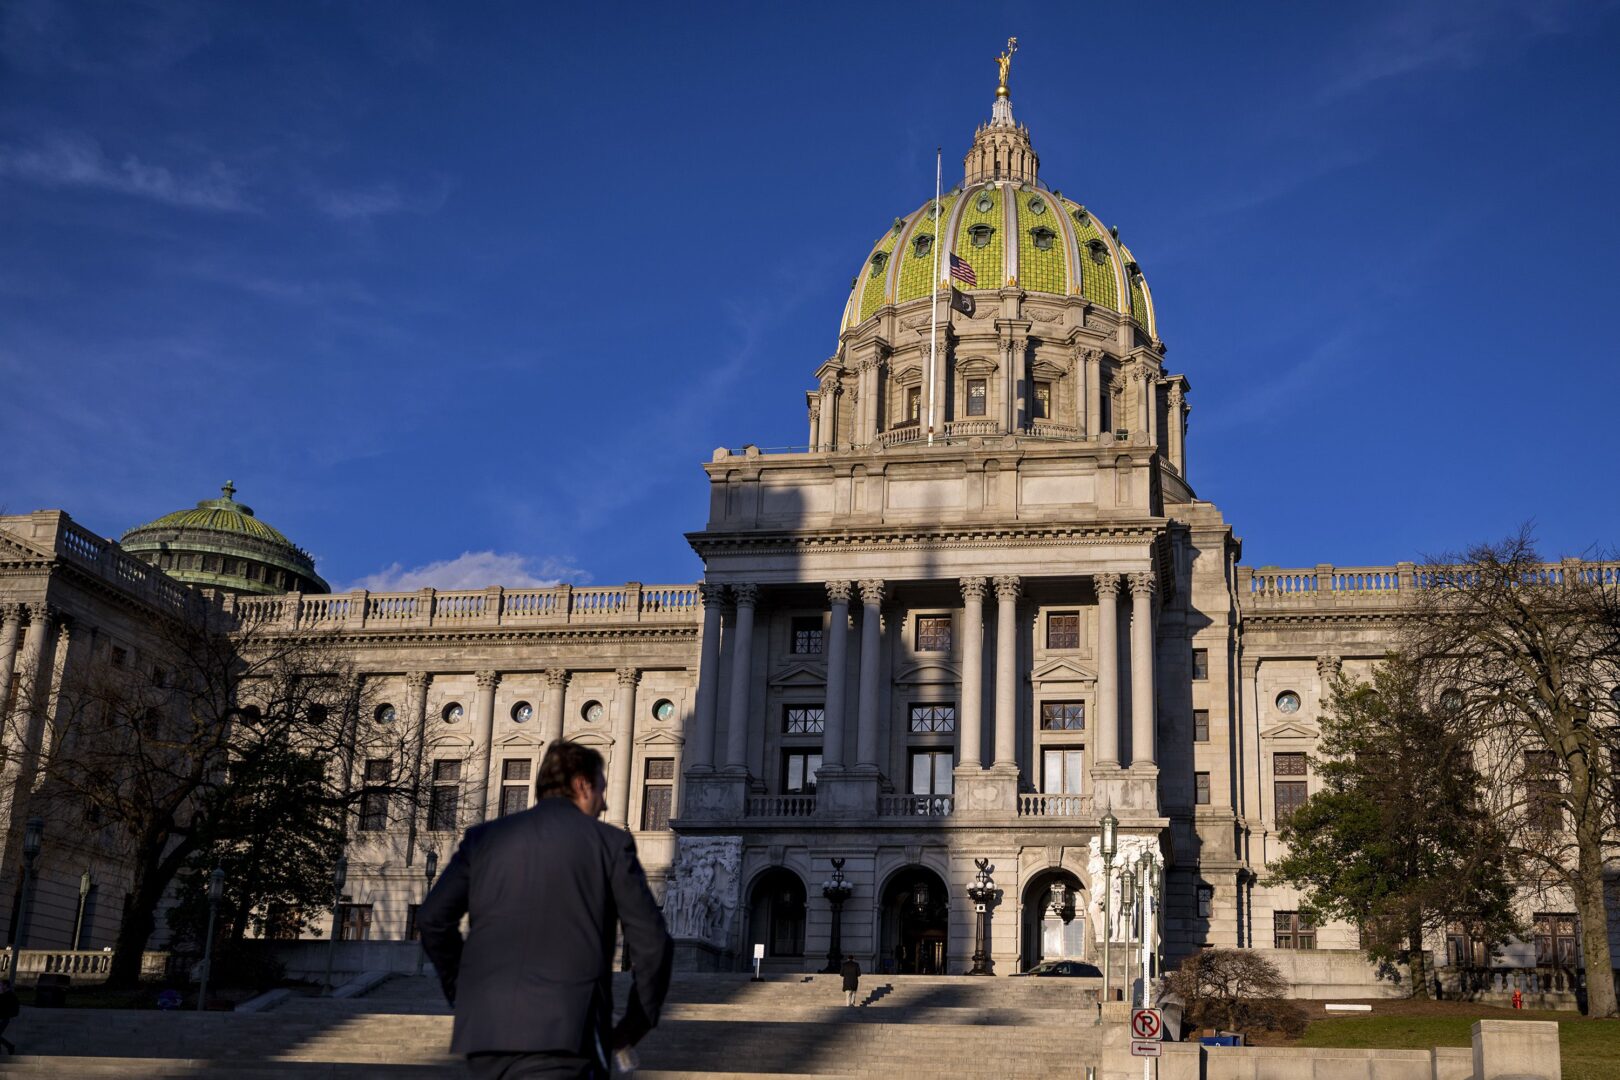 The state Capitol building in Harrisburg, Pennsylvania.